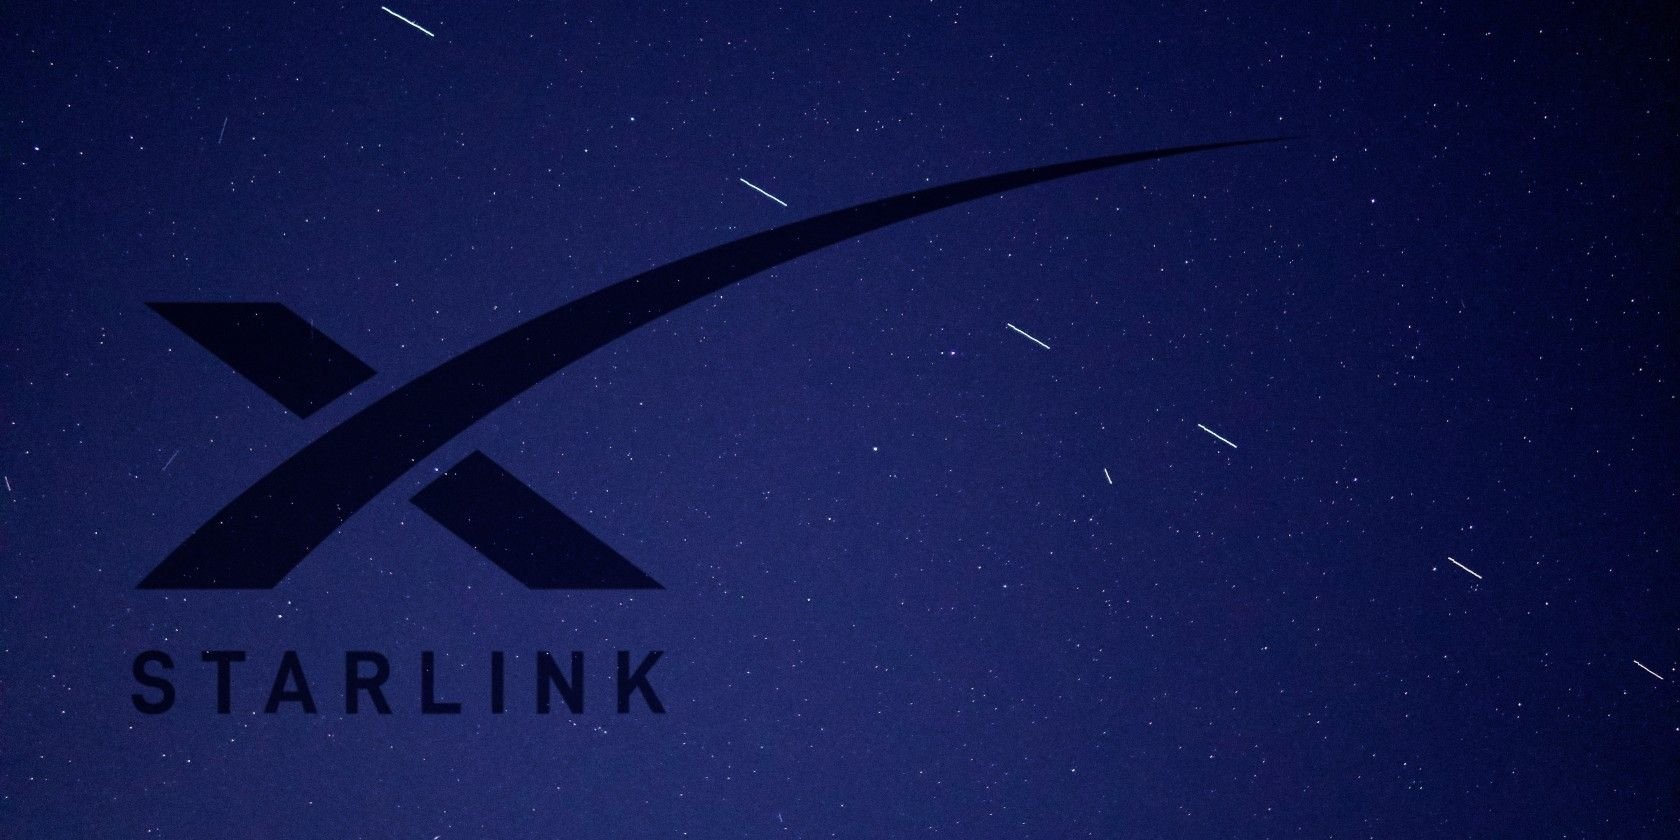 6 Key Facts About Elon Musk's Starlink Internet You Need to Know